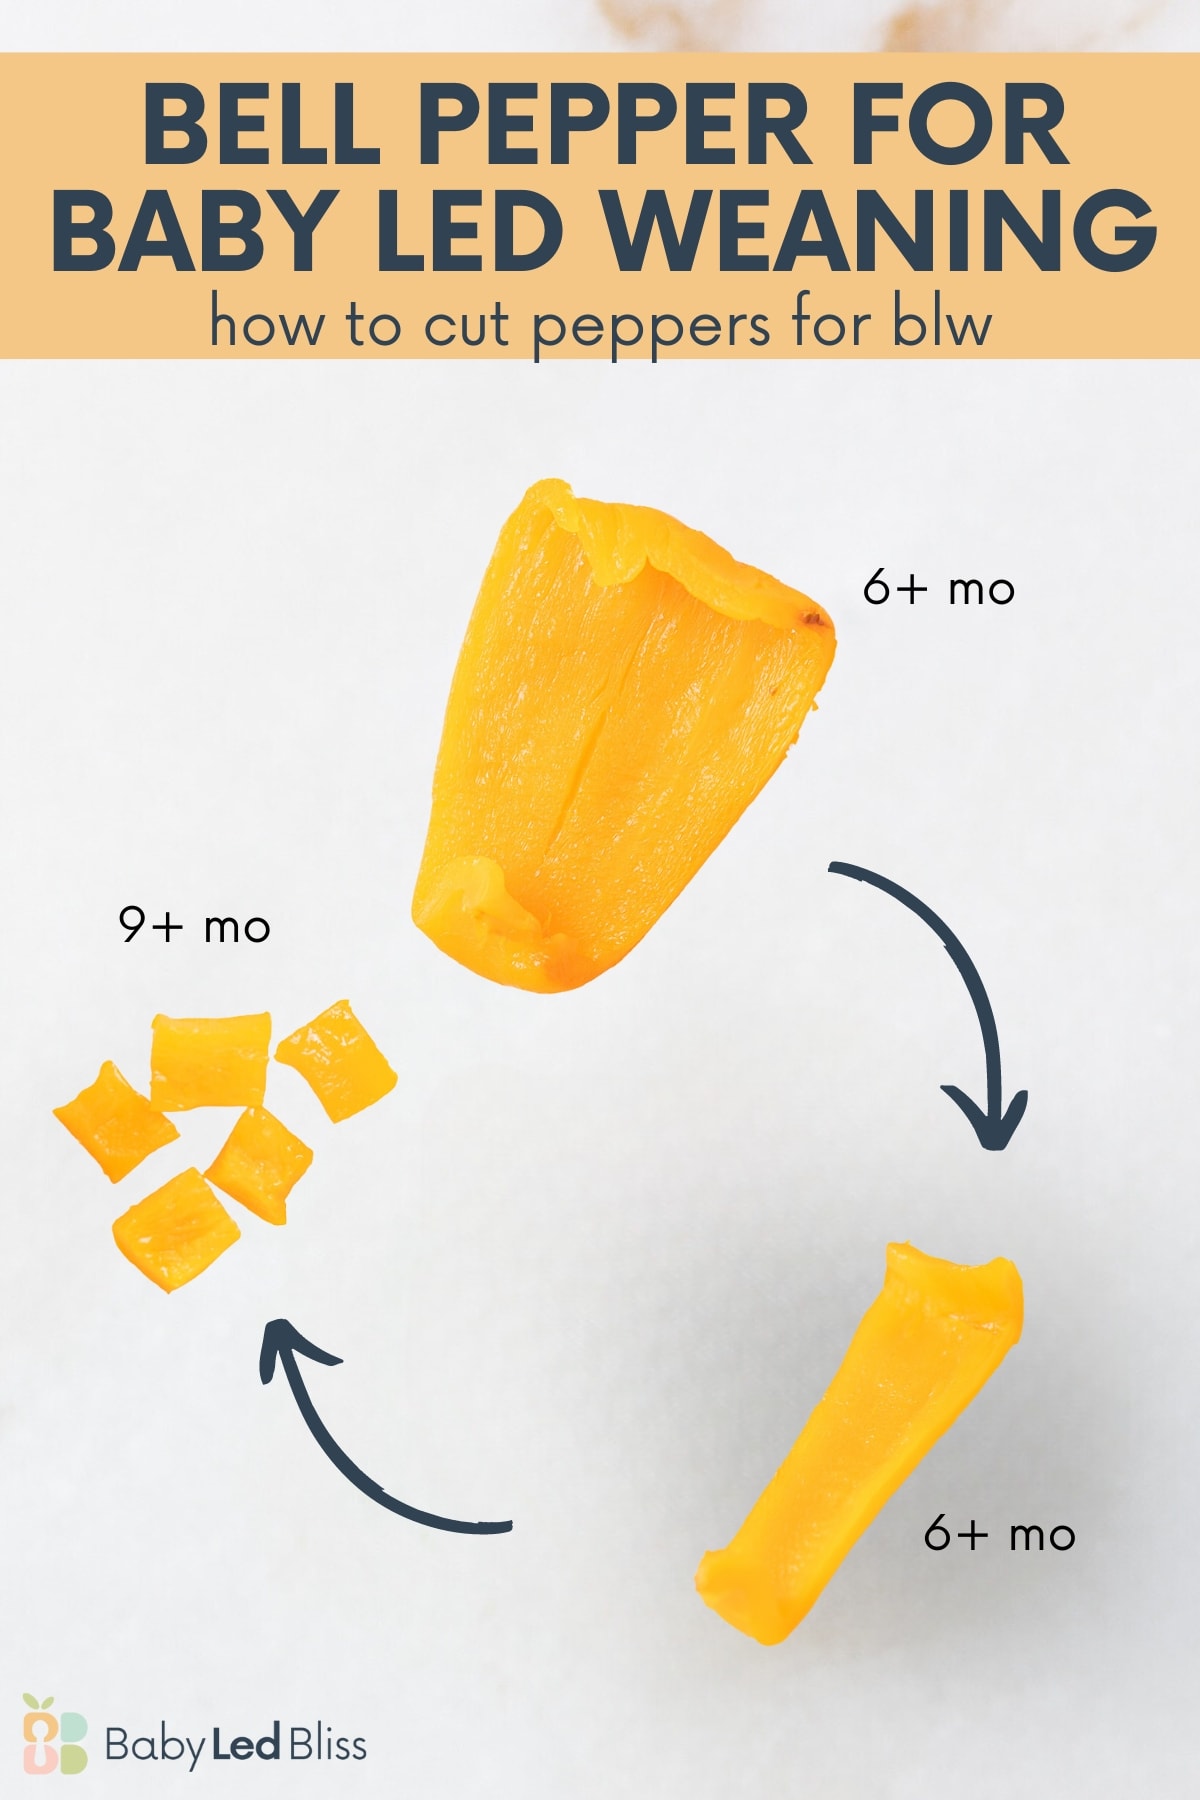 three methods of cutting bell peppers for baby led weaning with text and arrow overlays.